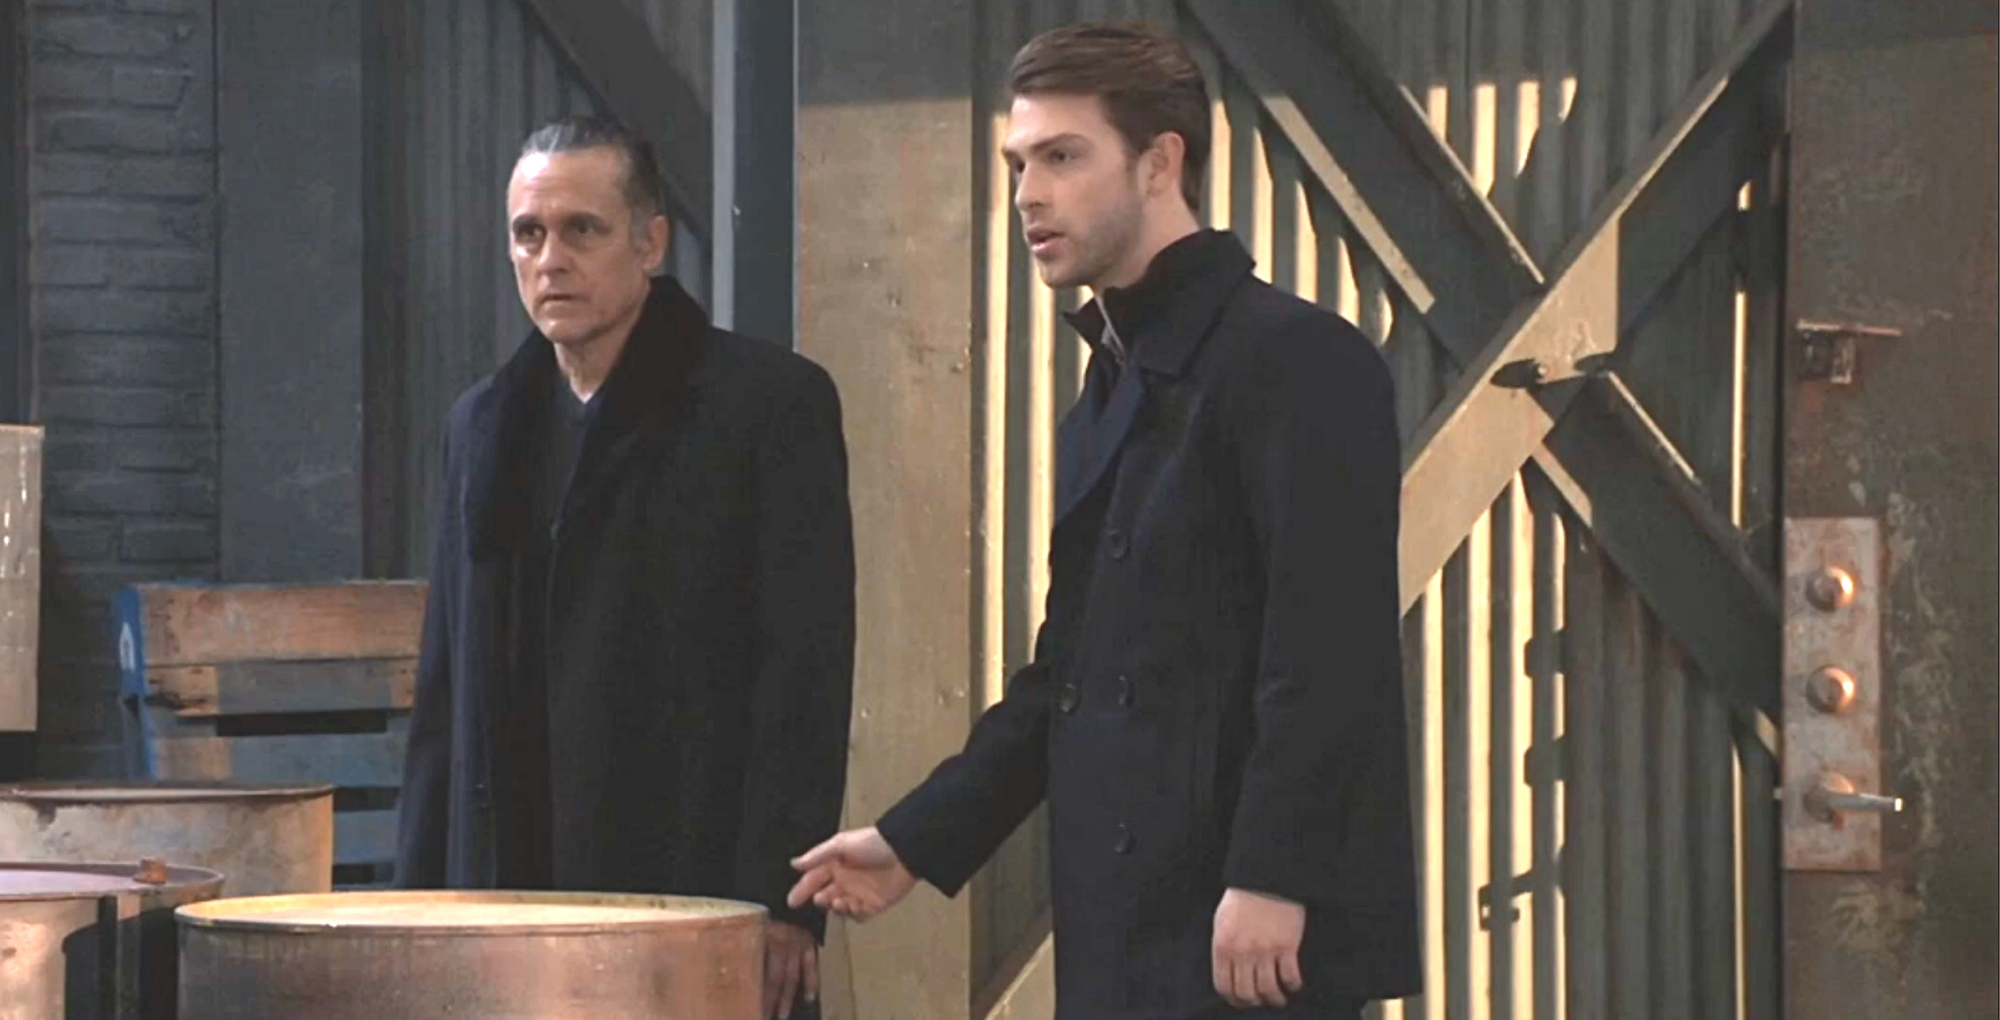 general hospital spoilers for march 13, 2023, have dex and sonny in a shootout